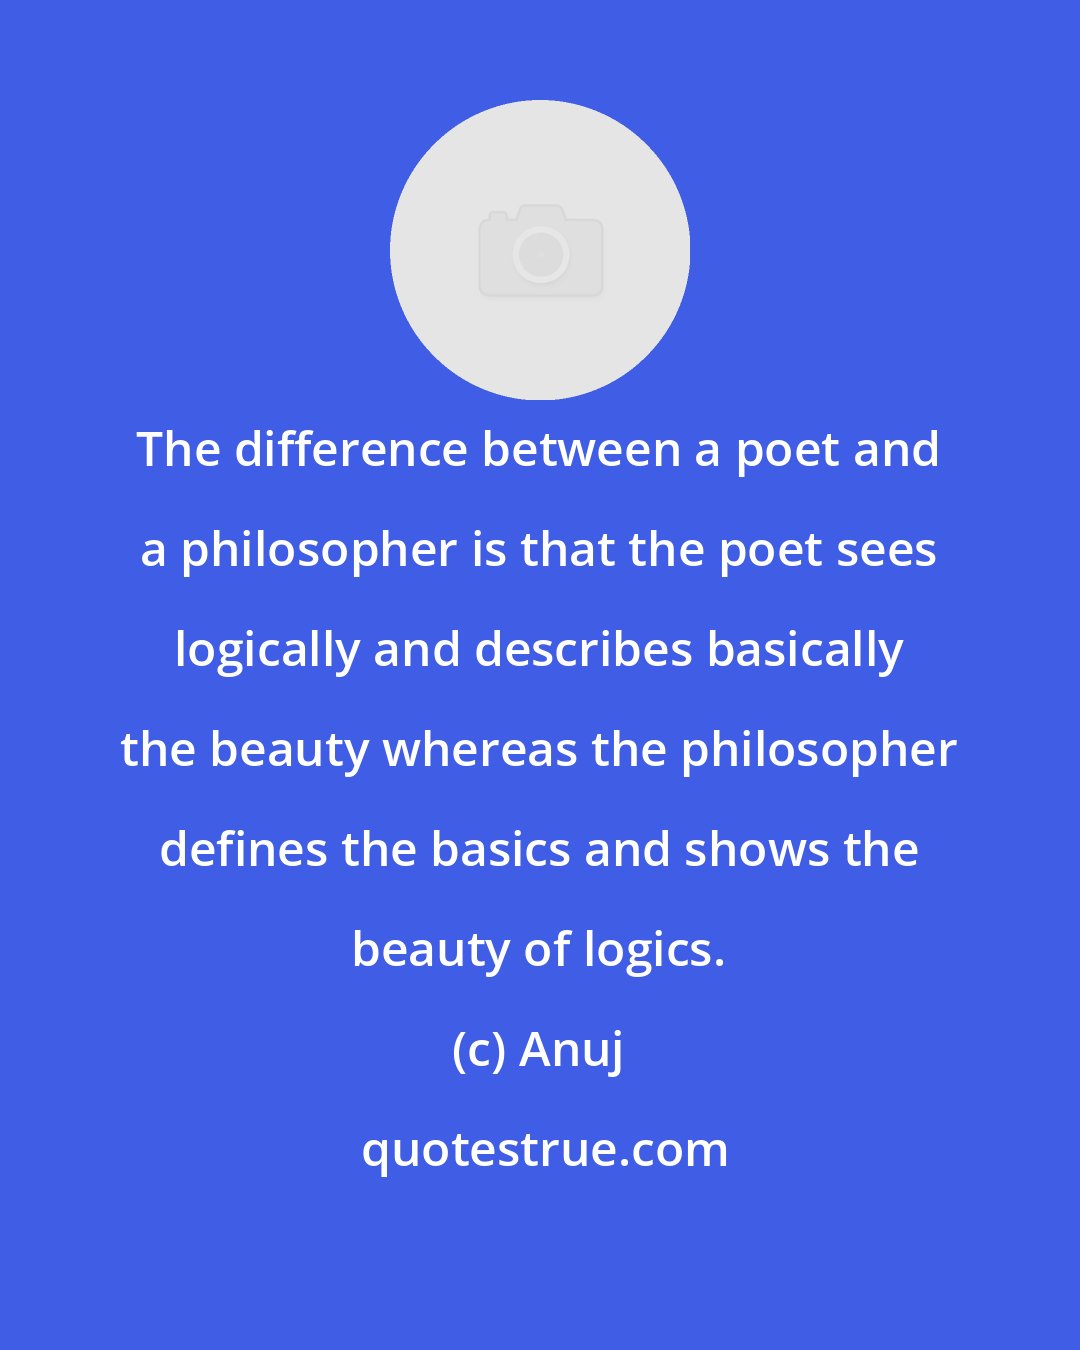 Anuj: The difference between a poet and a philosopher is that the poet sees logically and describes basically the beauty whereas the philosopher defines the basics and shows the beauty of logics.